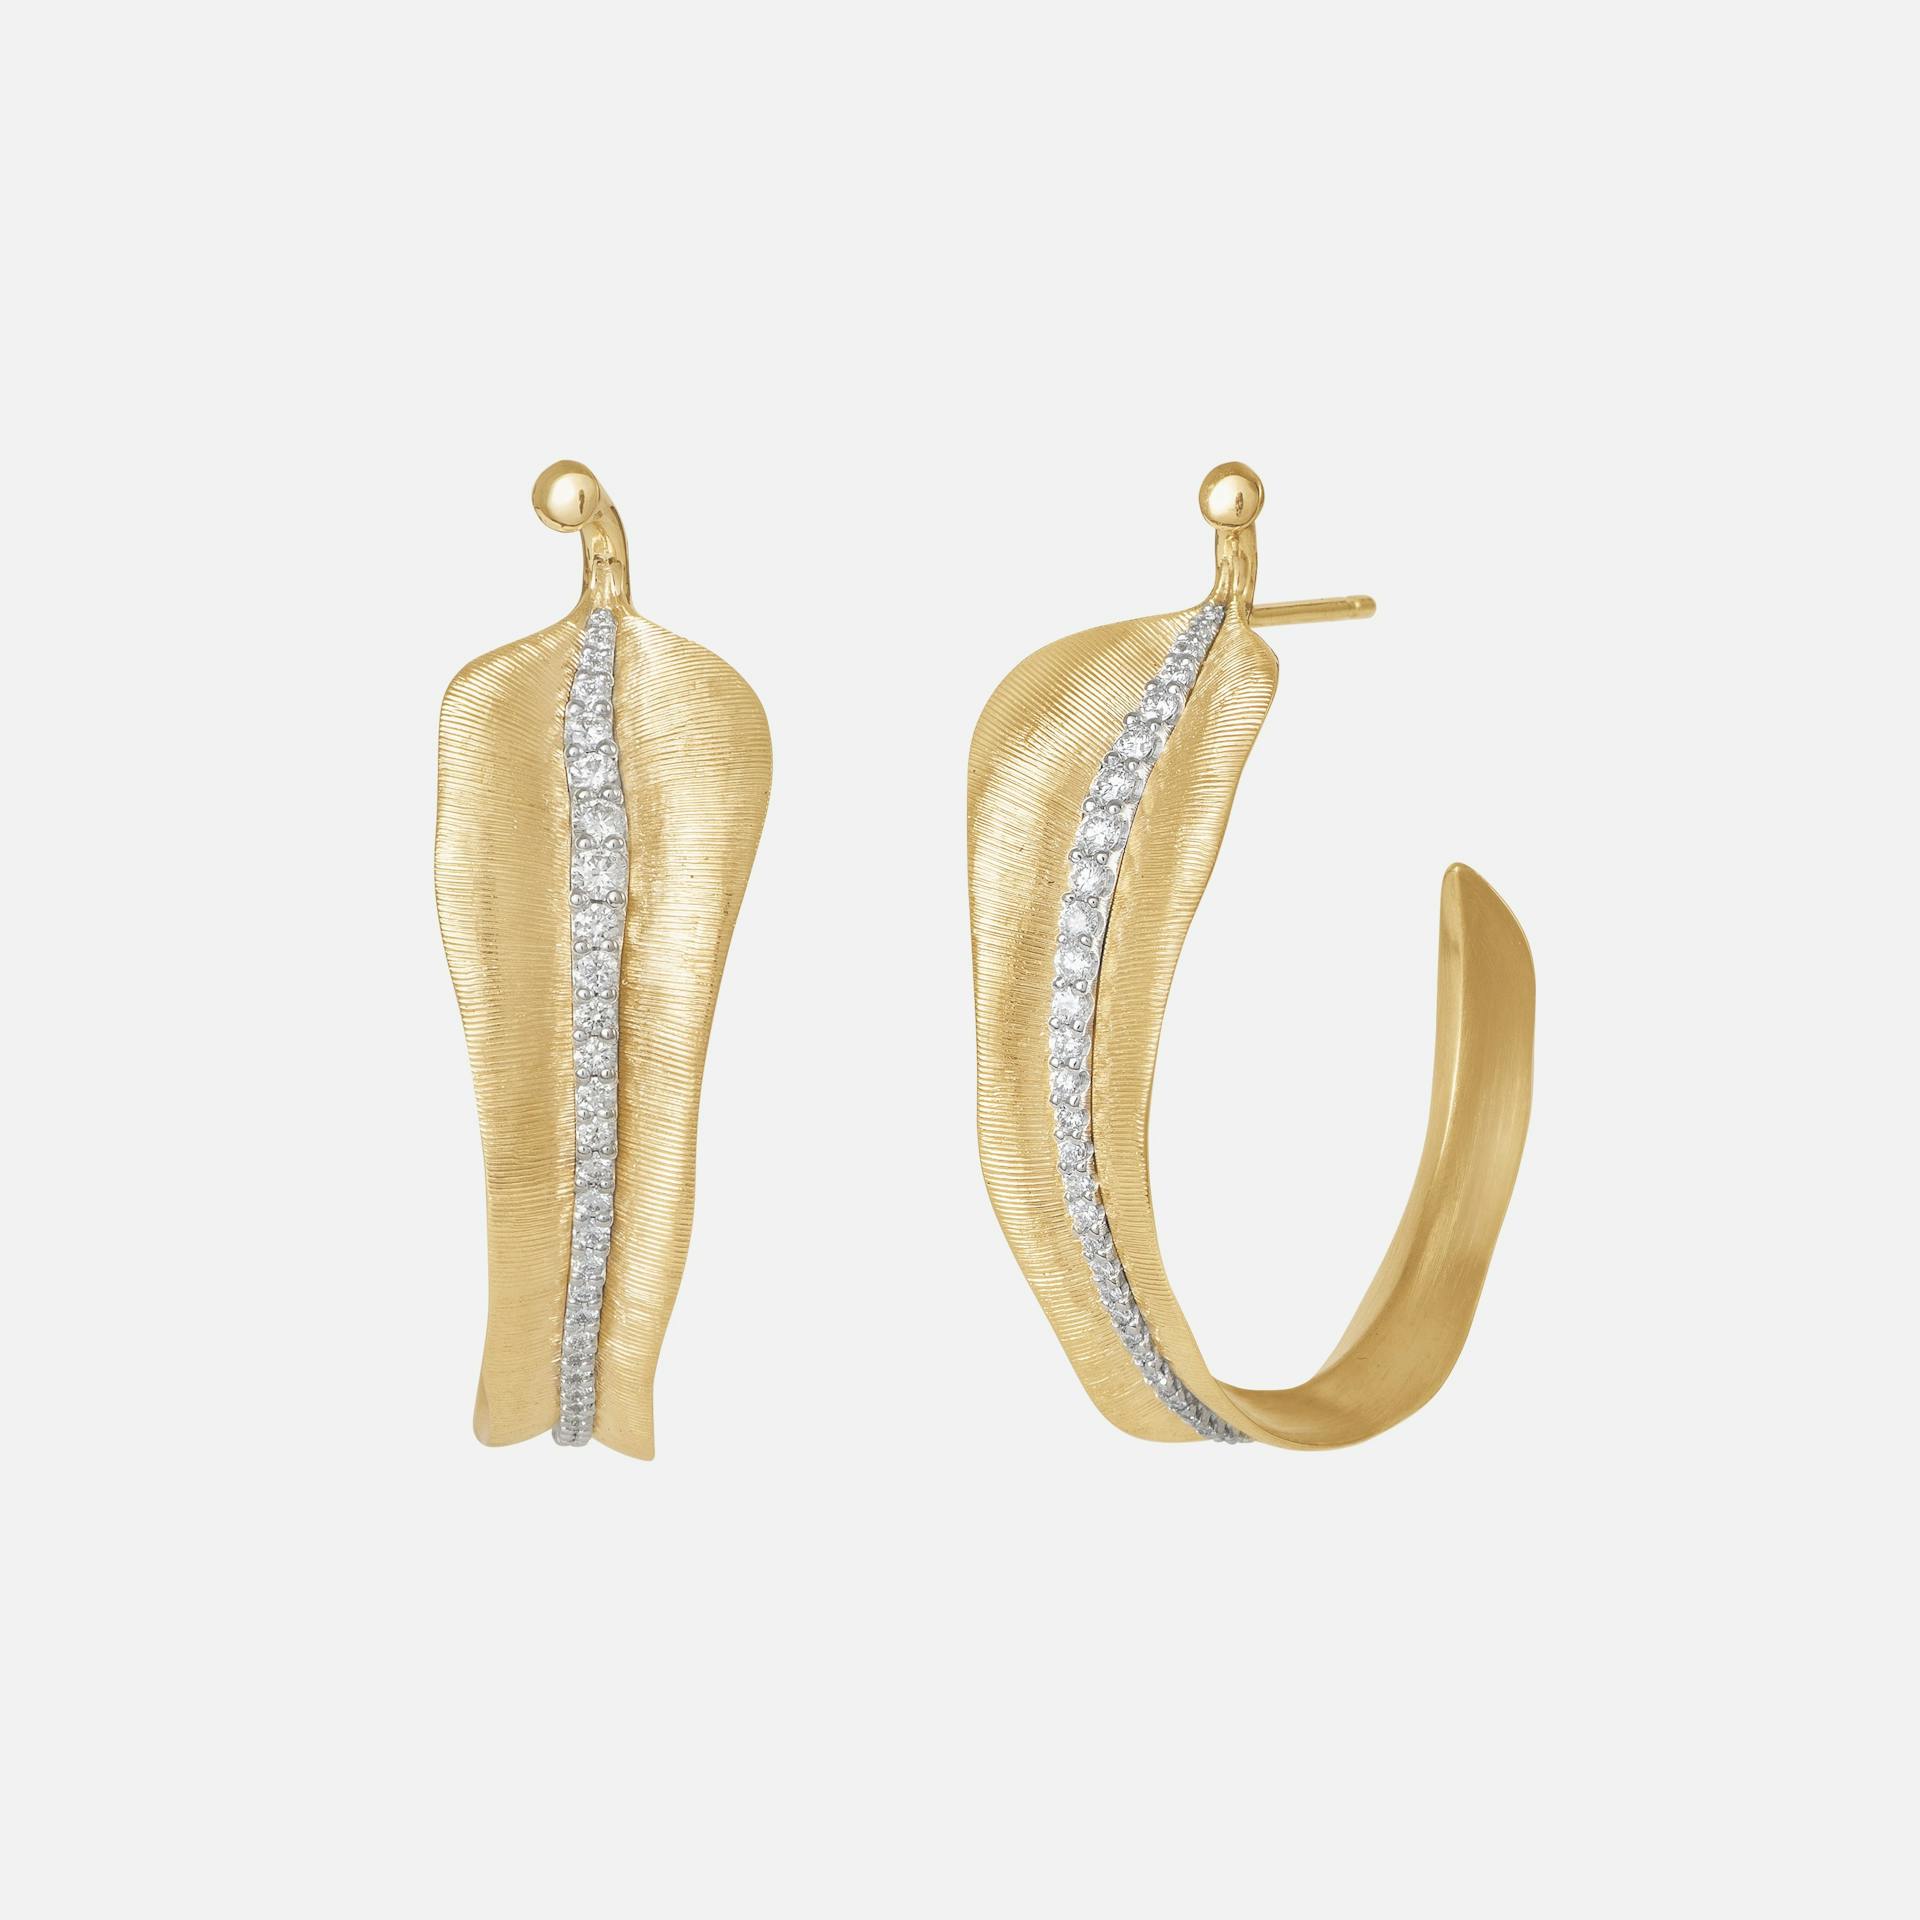 Leaves creol earrings large 18k gold and diamonds 0.83 ct. TW. VS.